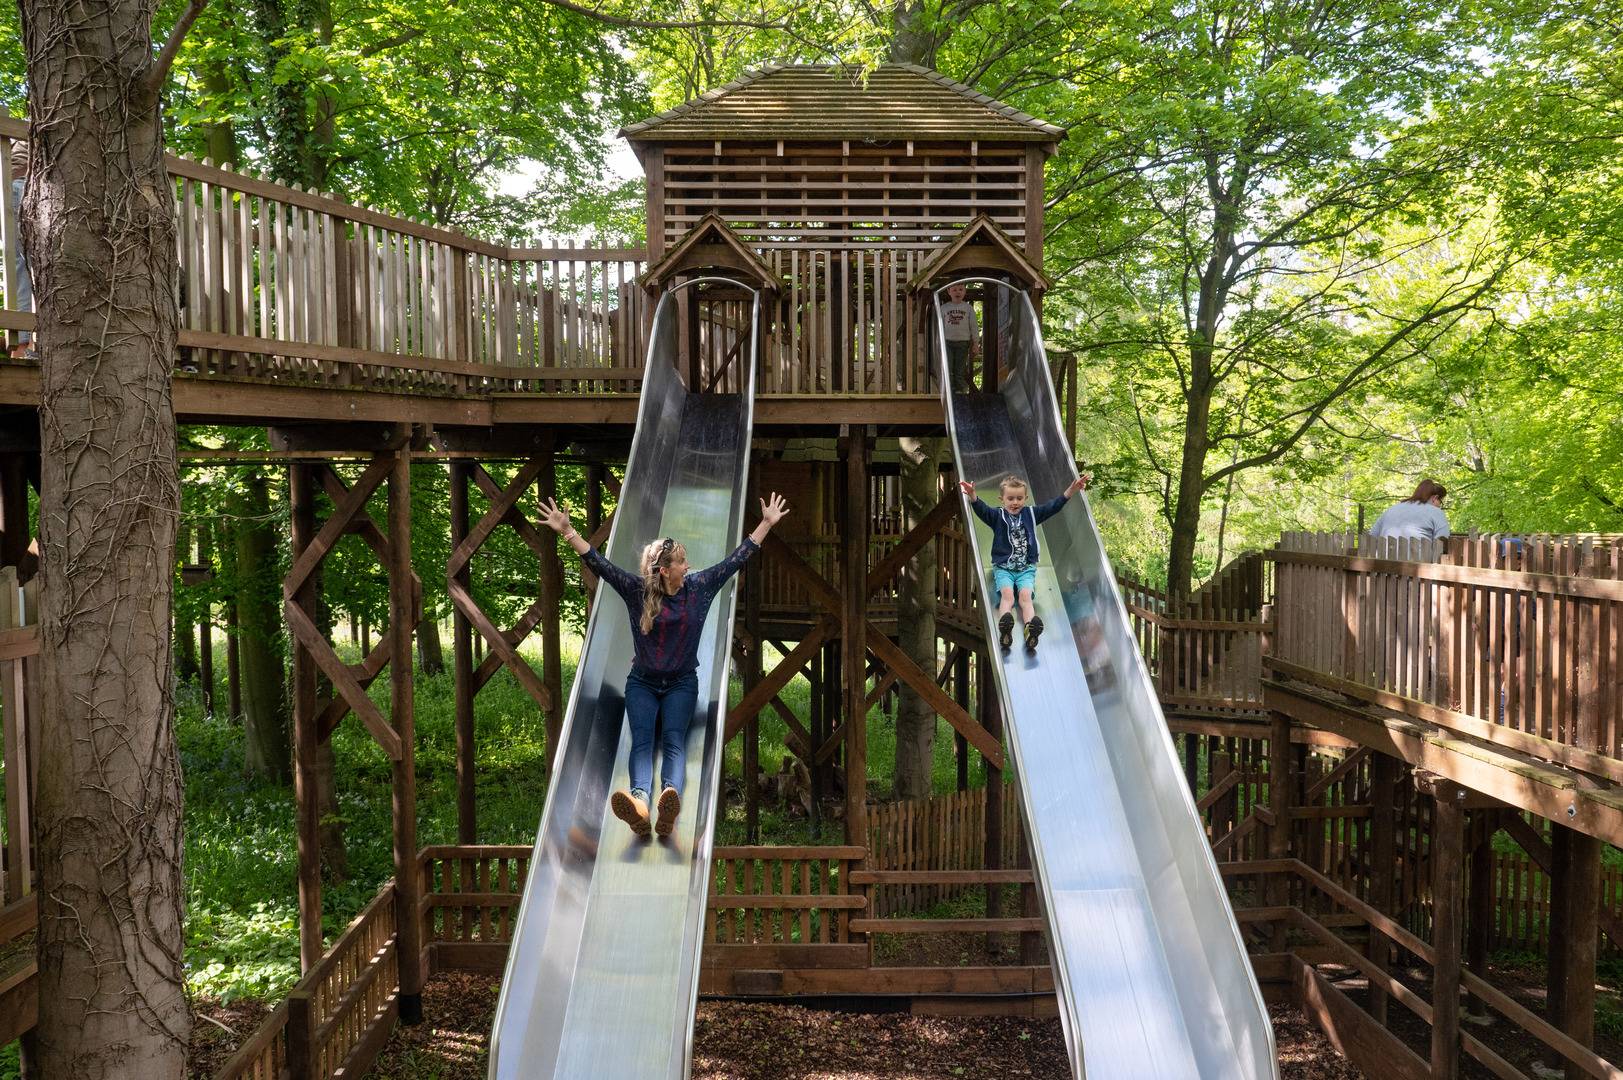 Mum and son going down slides at Fort Douglas - located at Dalkeith Country Park, Dalkeith Country Park